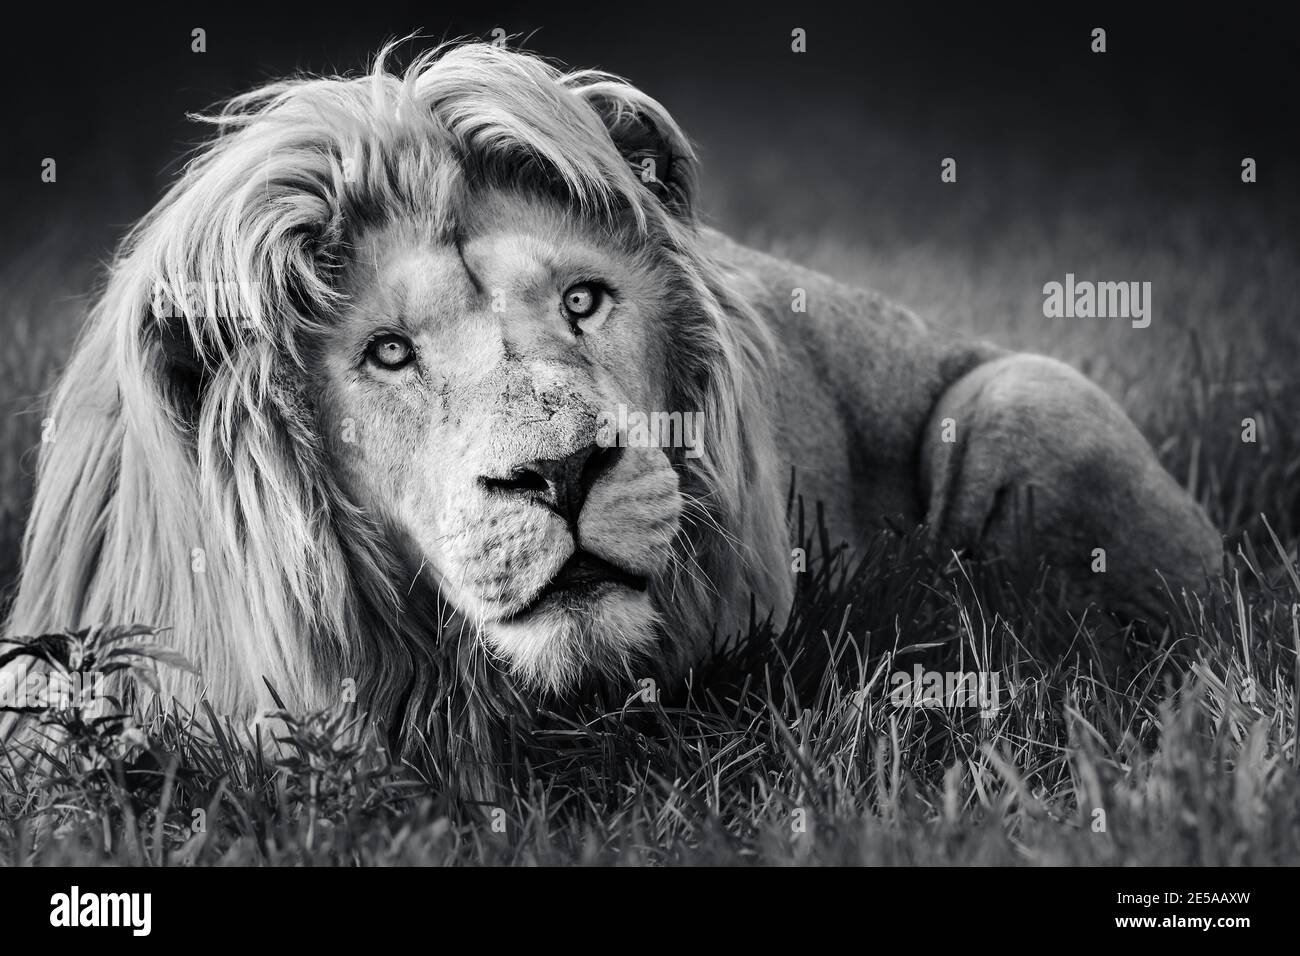 Lion Face High Resolution Stock Photography and Images - Alamy